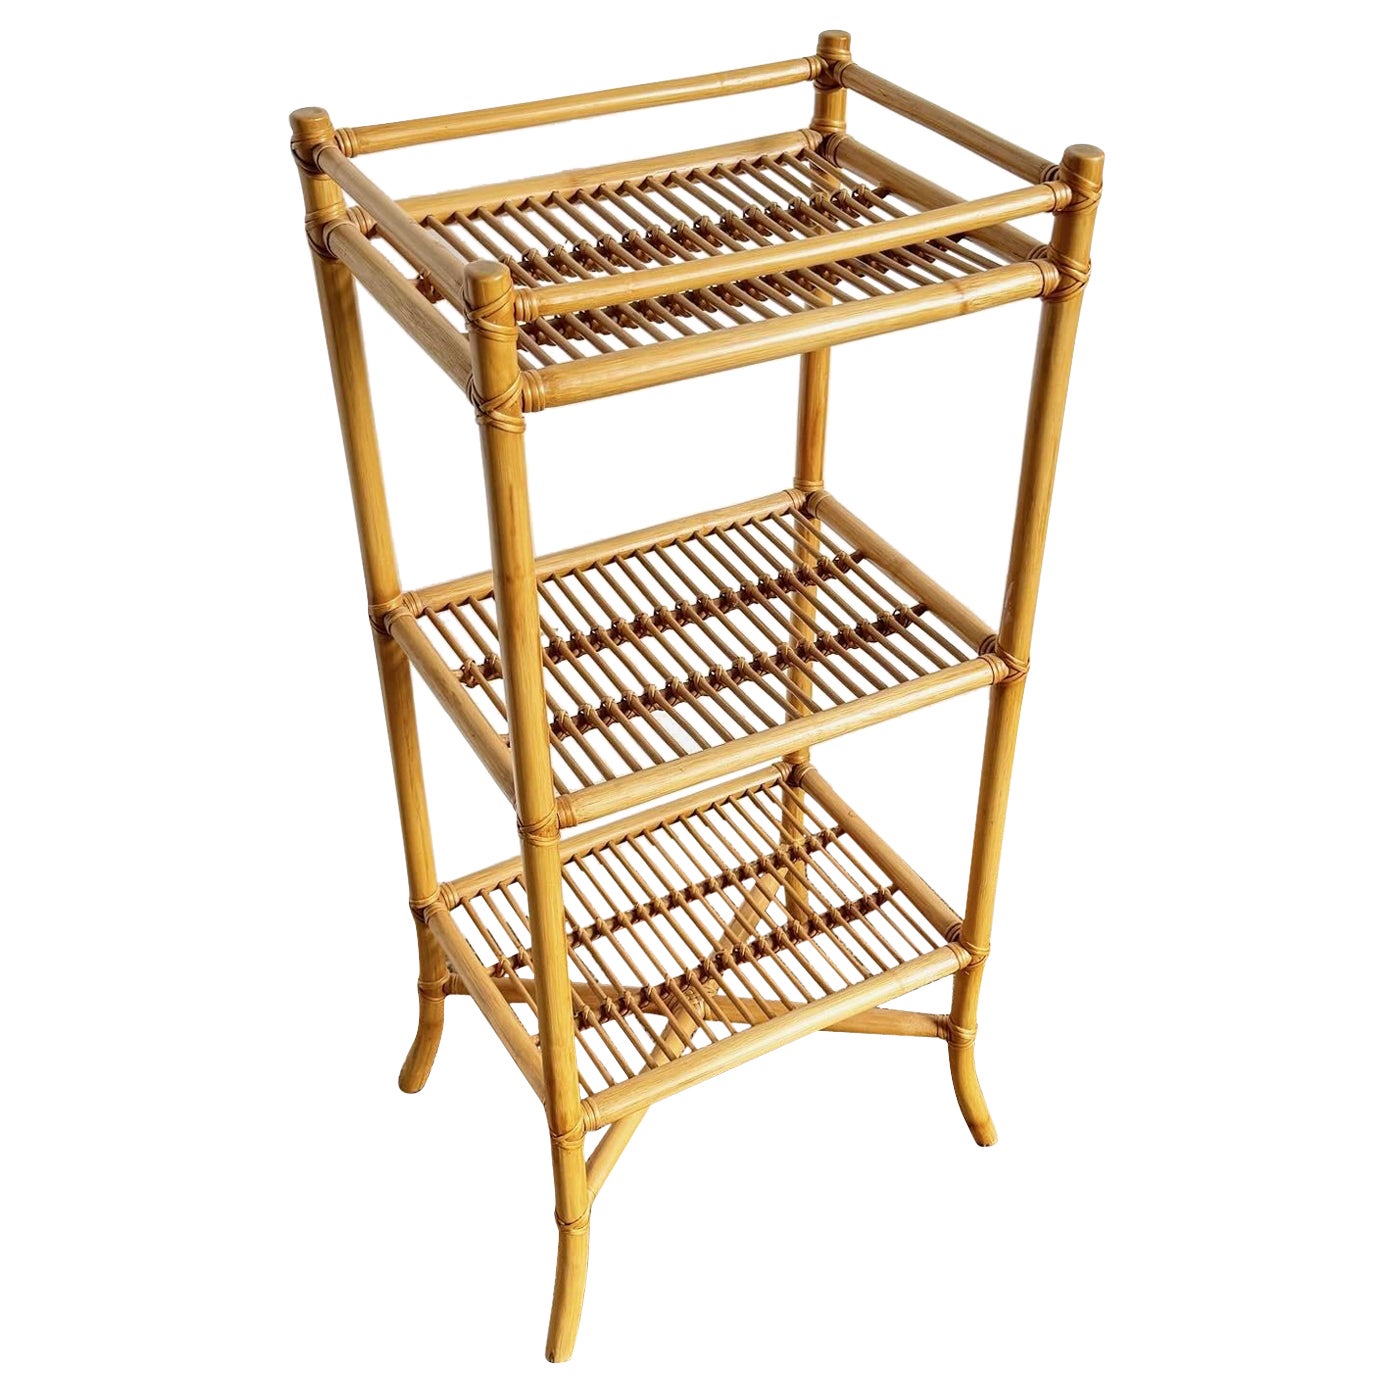 Boho Chic Bamboo Rattan Regal/Etagere/Stand